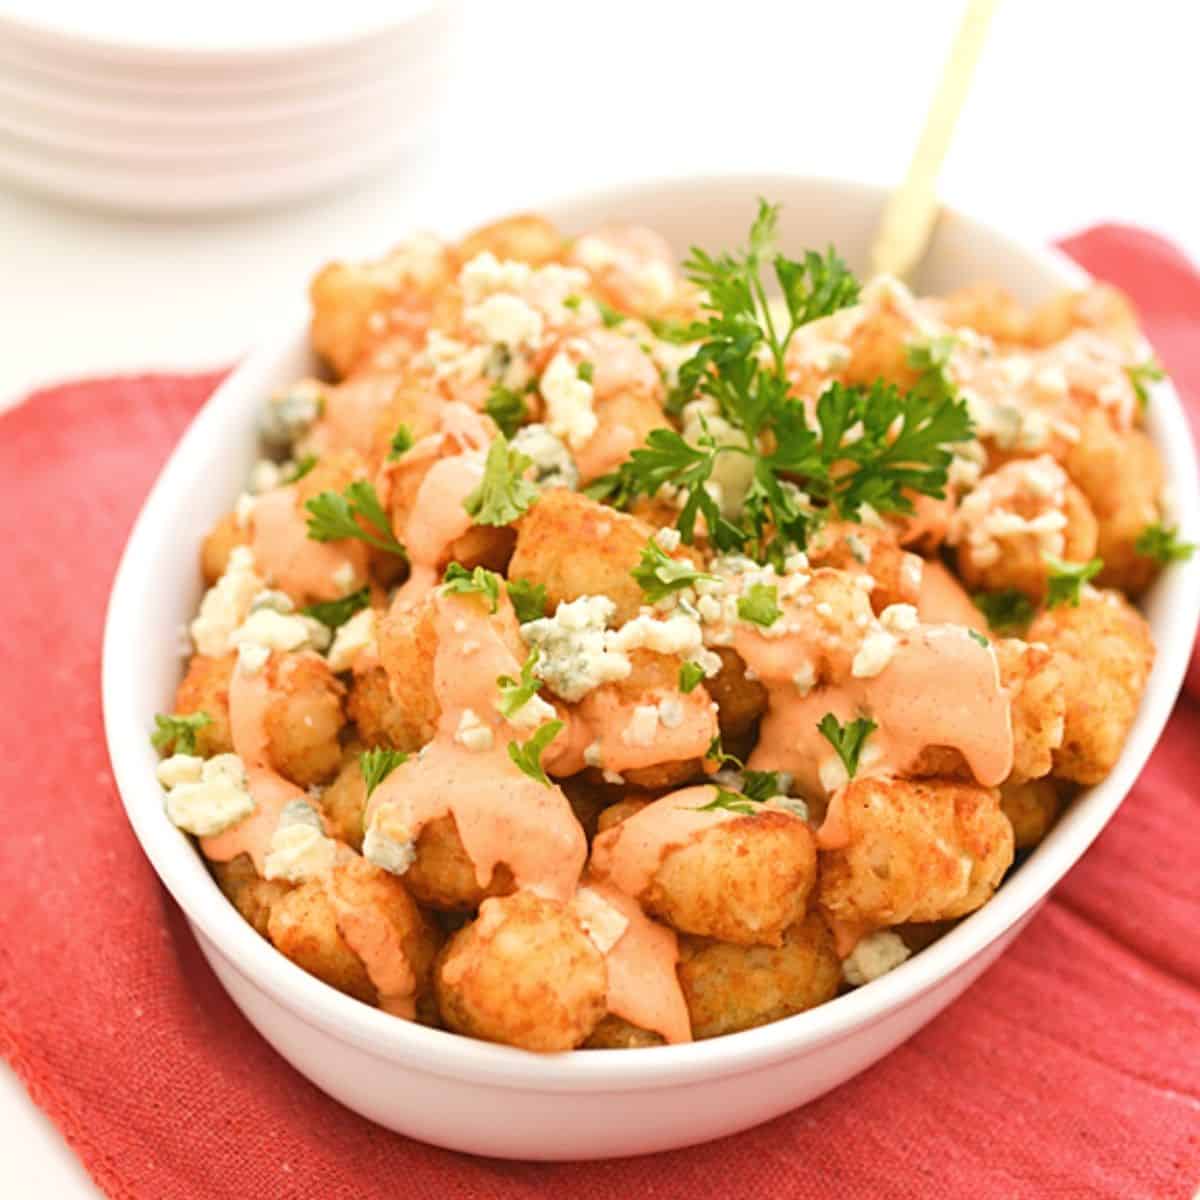 https://www.cupcakesandcutlery.com/wp-content/uploads/2016/11/tater-tots-with-buffalo-aioli-featured-image.jpg